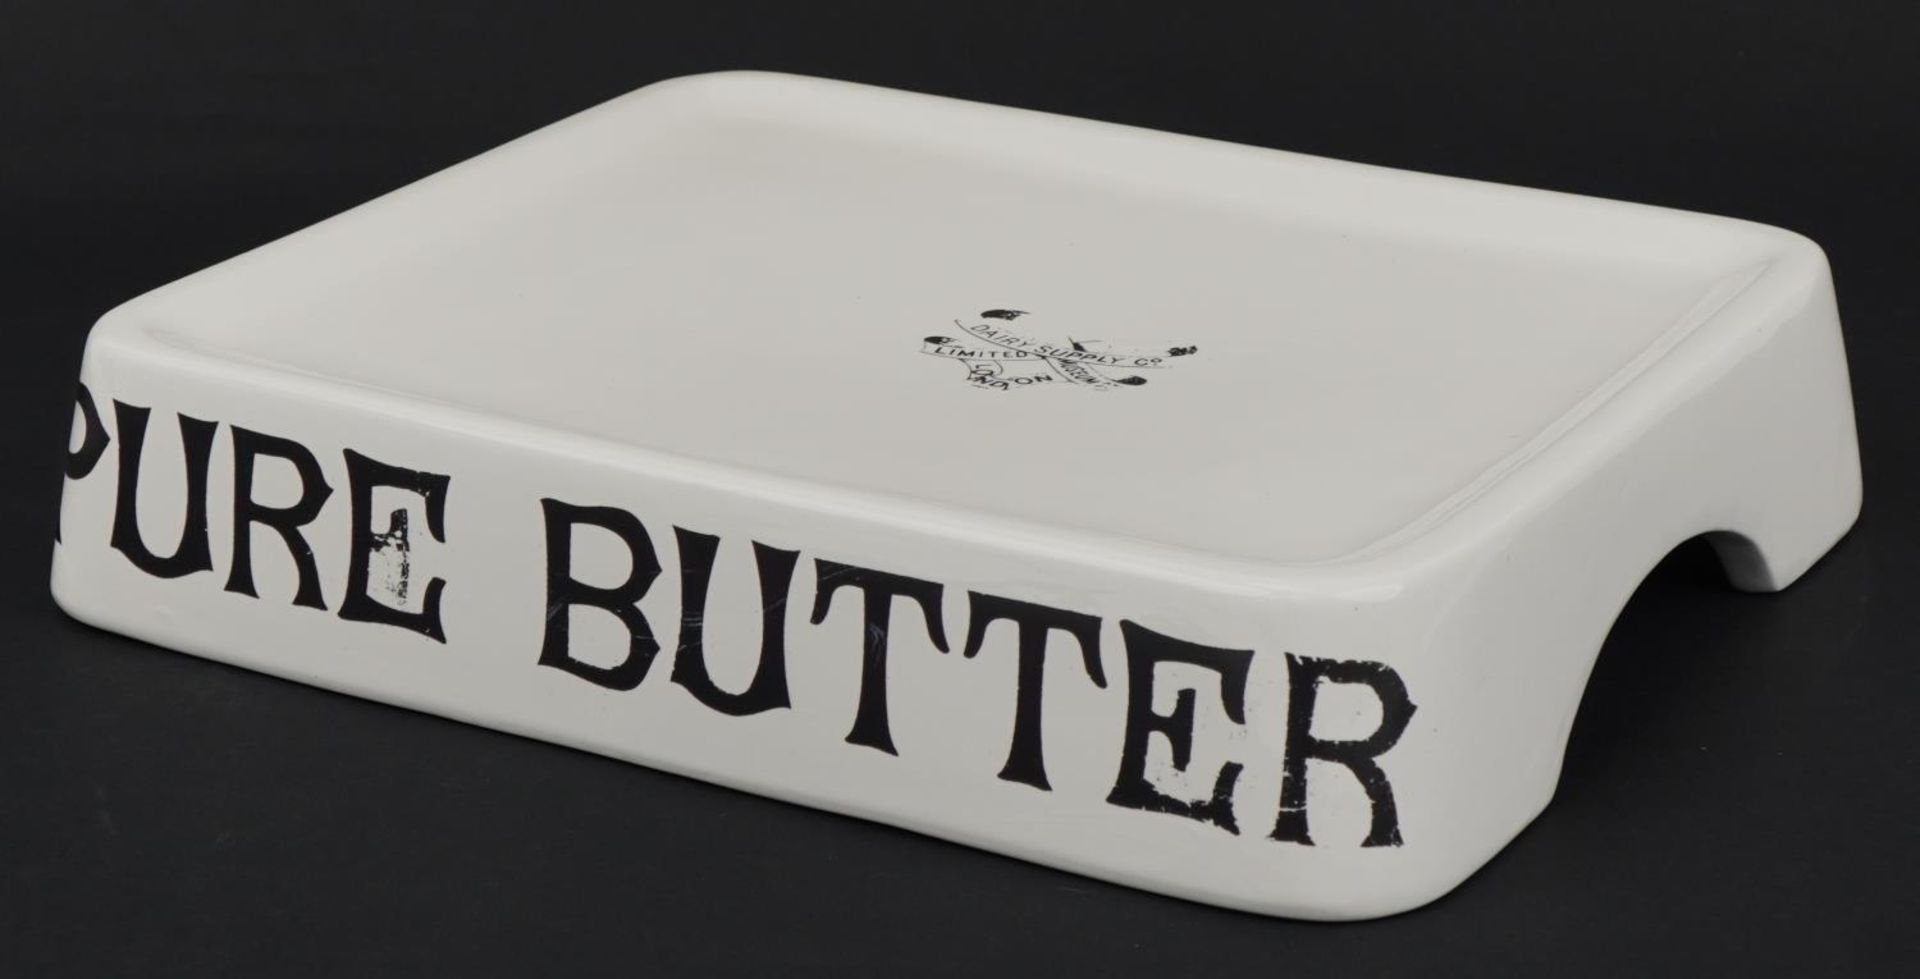 Agricultural interest Pure Butter ceramic stand, 34cm wide